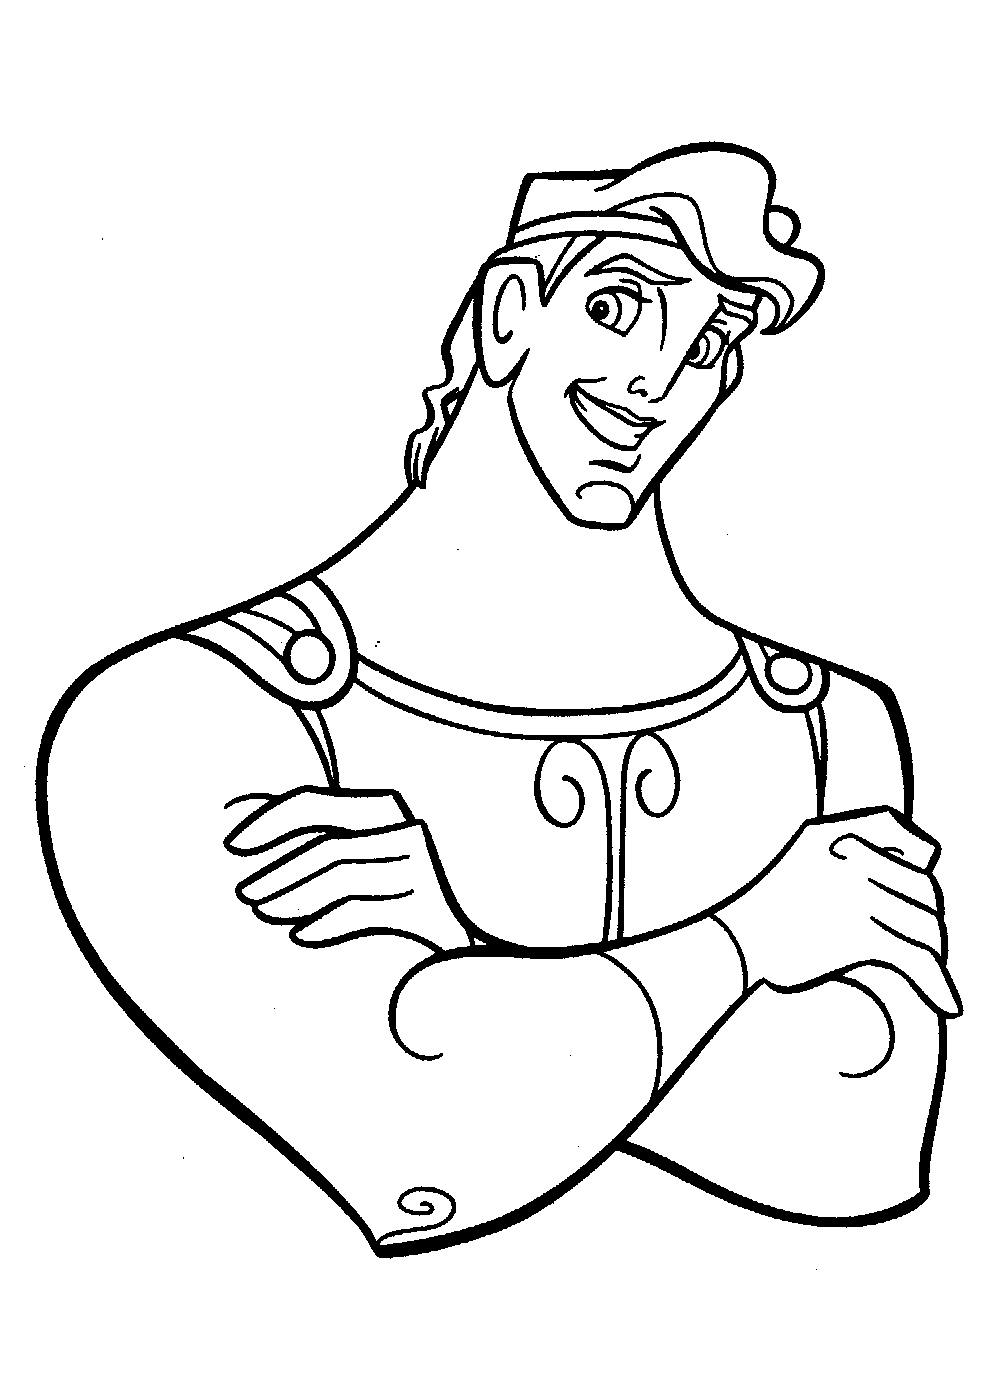 Hercules to color for children - Hercules Kids Coloring Pages